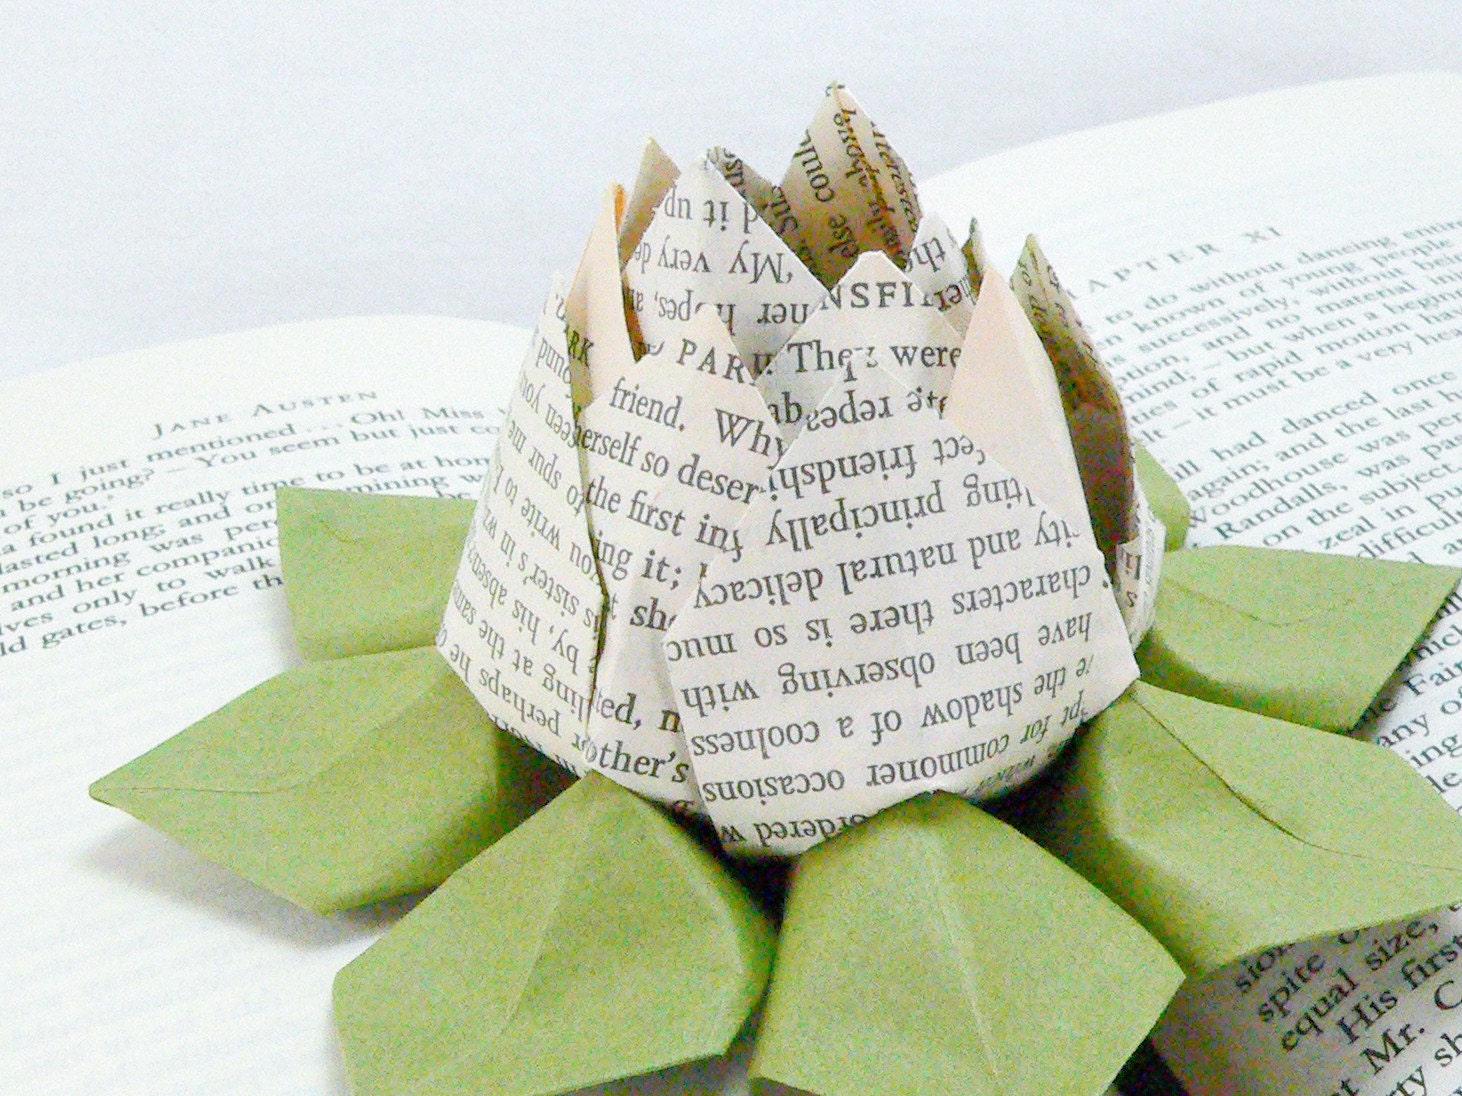 Origami Lotus Flower Decoration or Favor - made from the pages of  an old Jane Austen novel